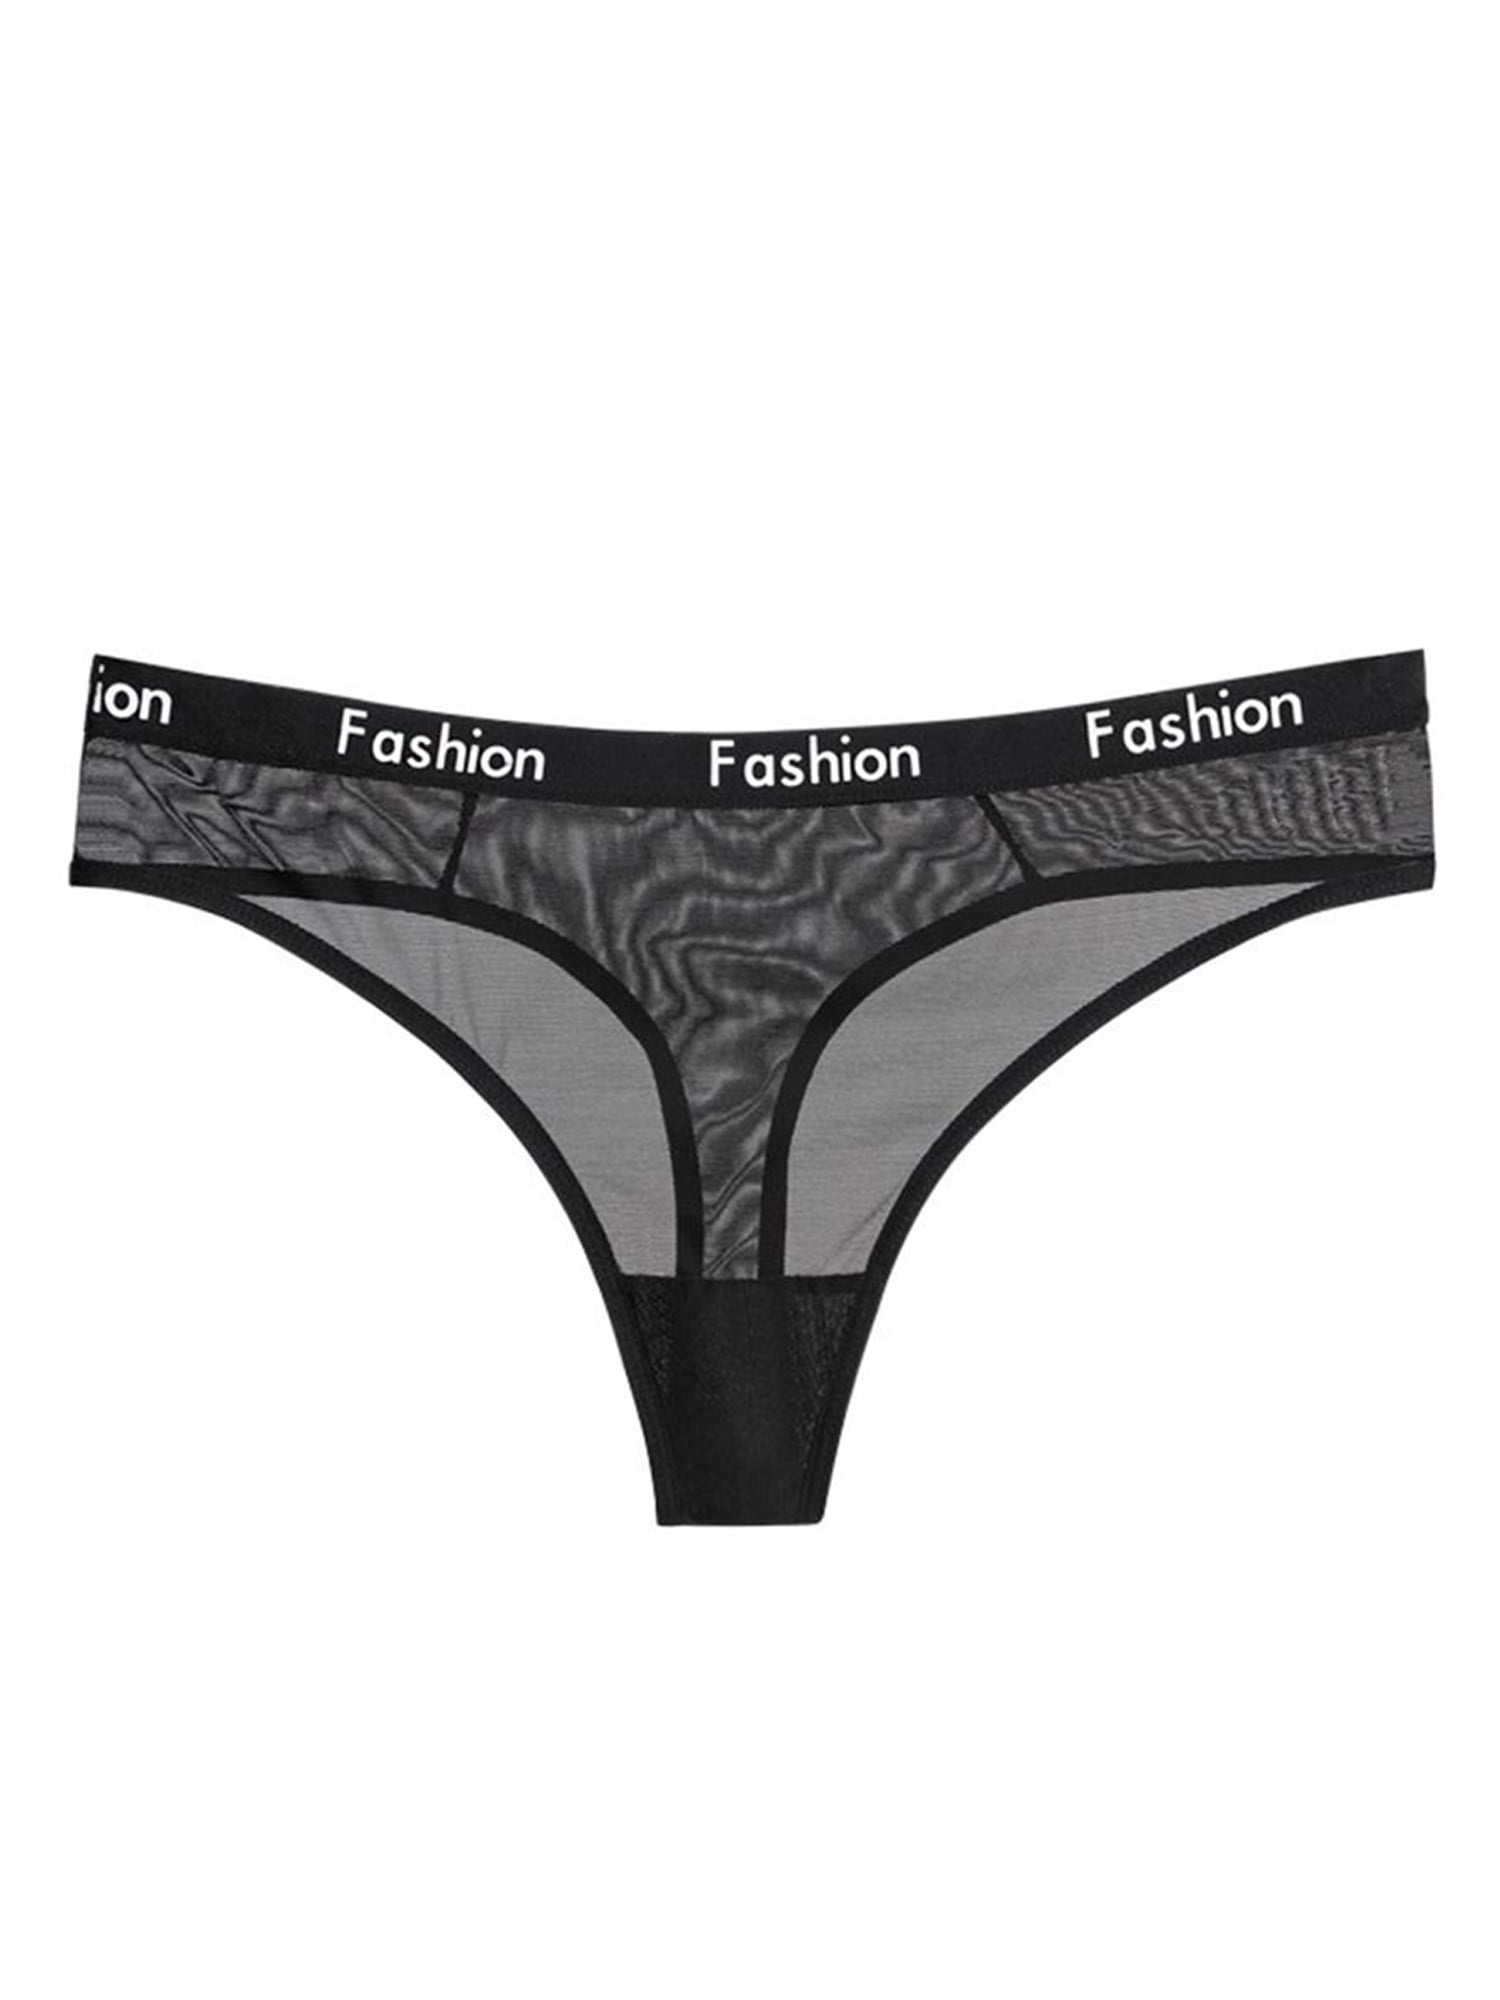 Moschino Brief in Grey Grey Womens Clothing Lingerie Knickers and underwear 